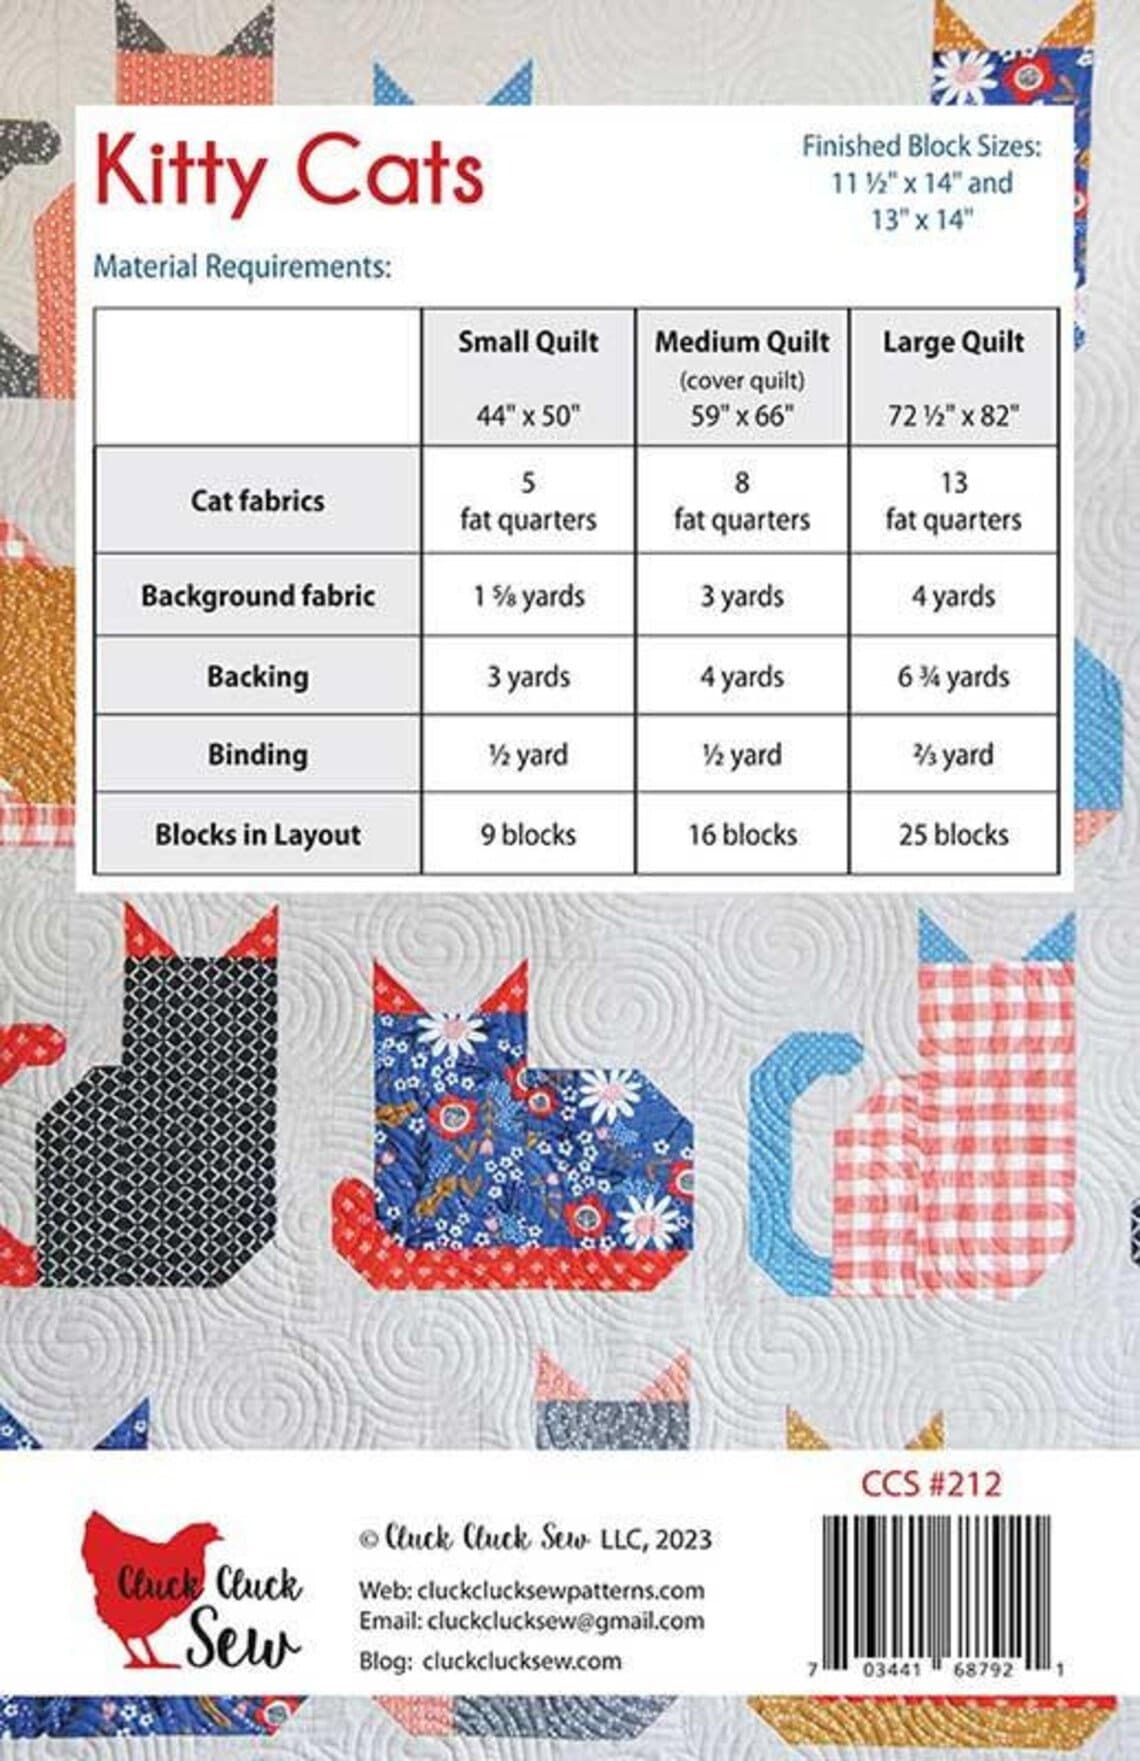 Kitty Cats Quilt Pattern - Cluck Cluck Sew - Fat Quarter Friendly with 3 Size Options